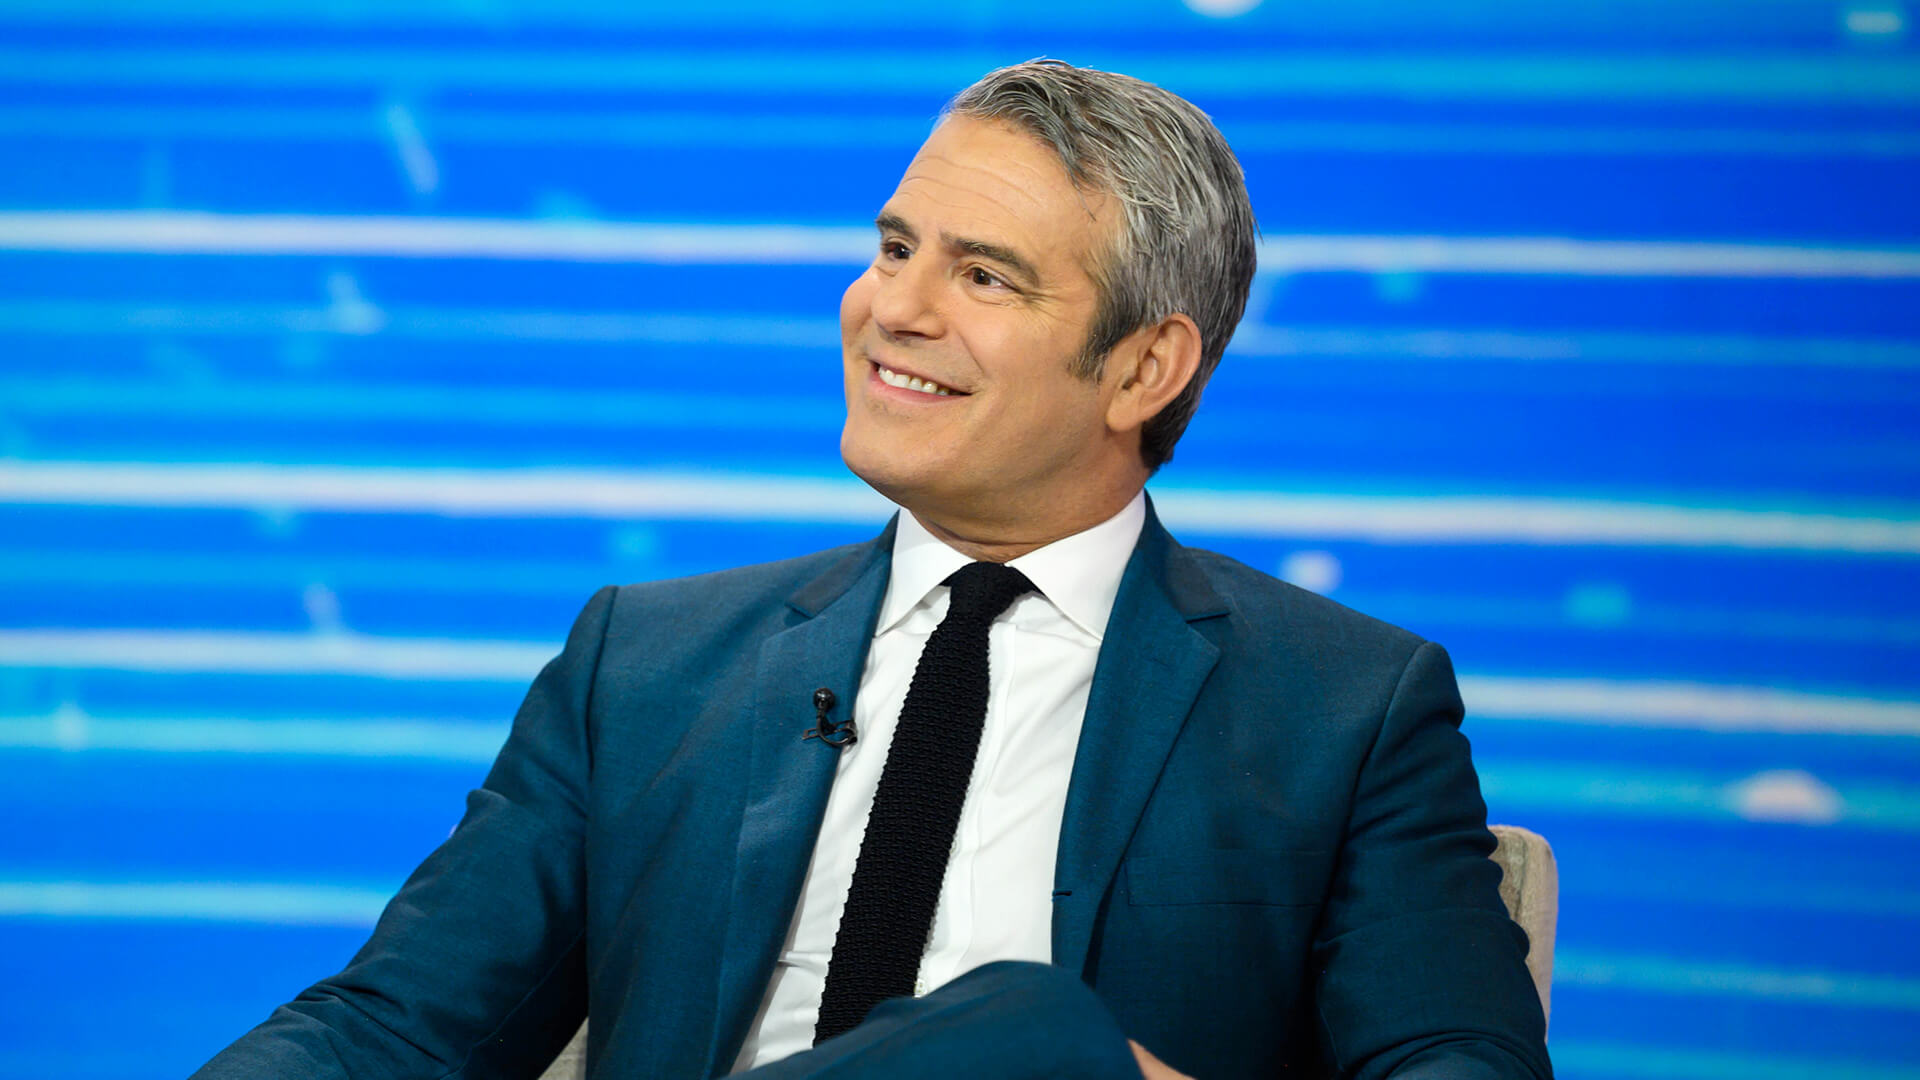 Andy Cohen Spill Details On ‘The Real Housewives of Dubai’ Coming To Bravo In 2022!